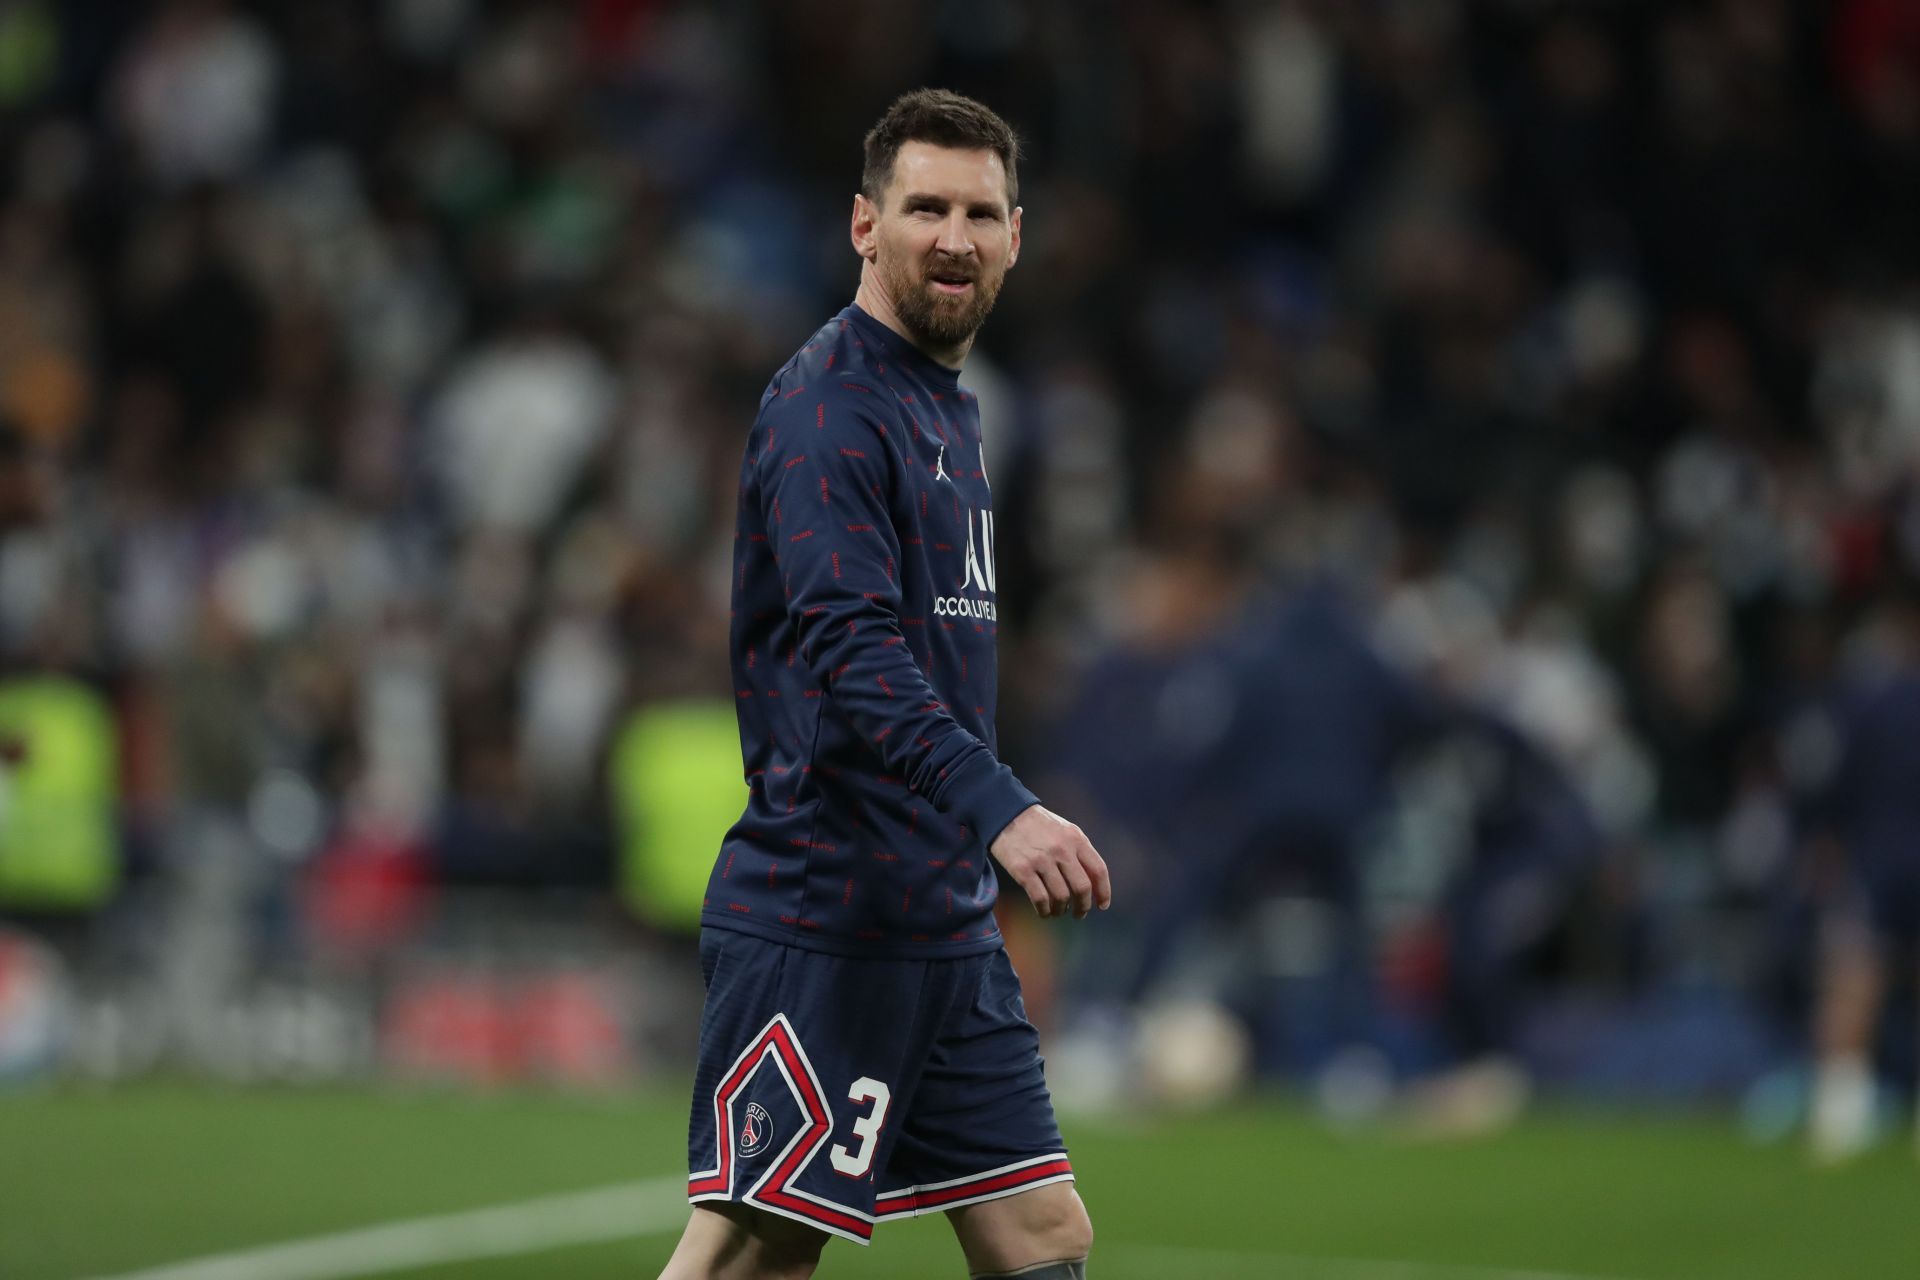 Lionel Messi won the Ligue 1 title for the first time this season.